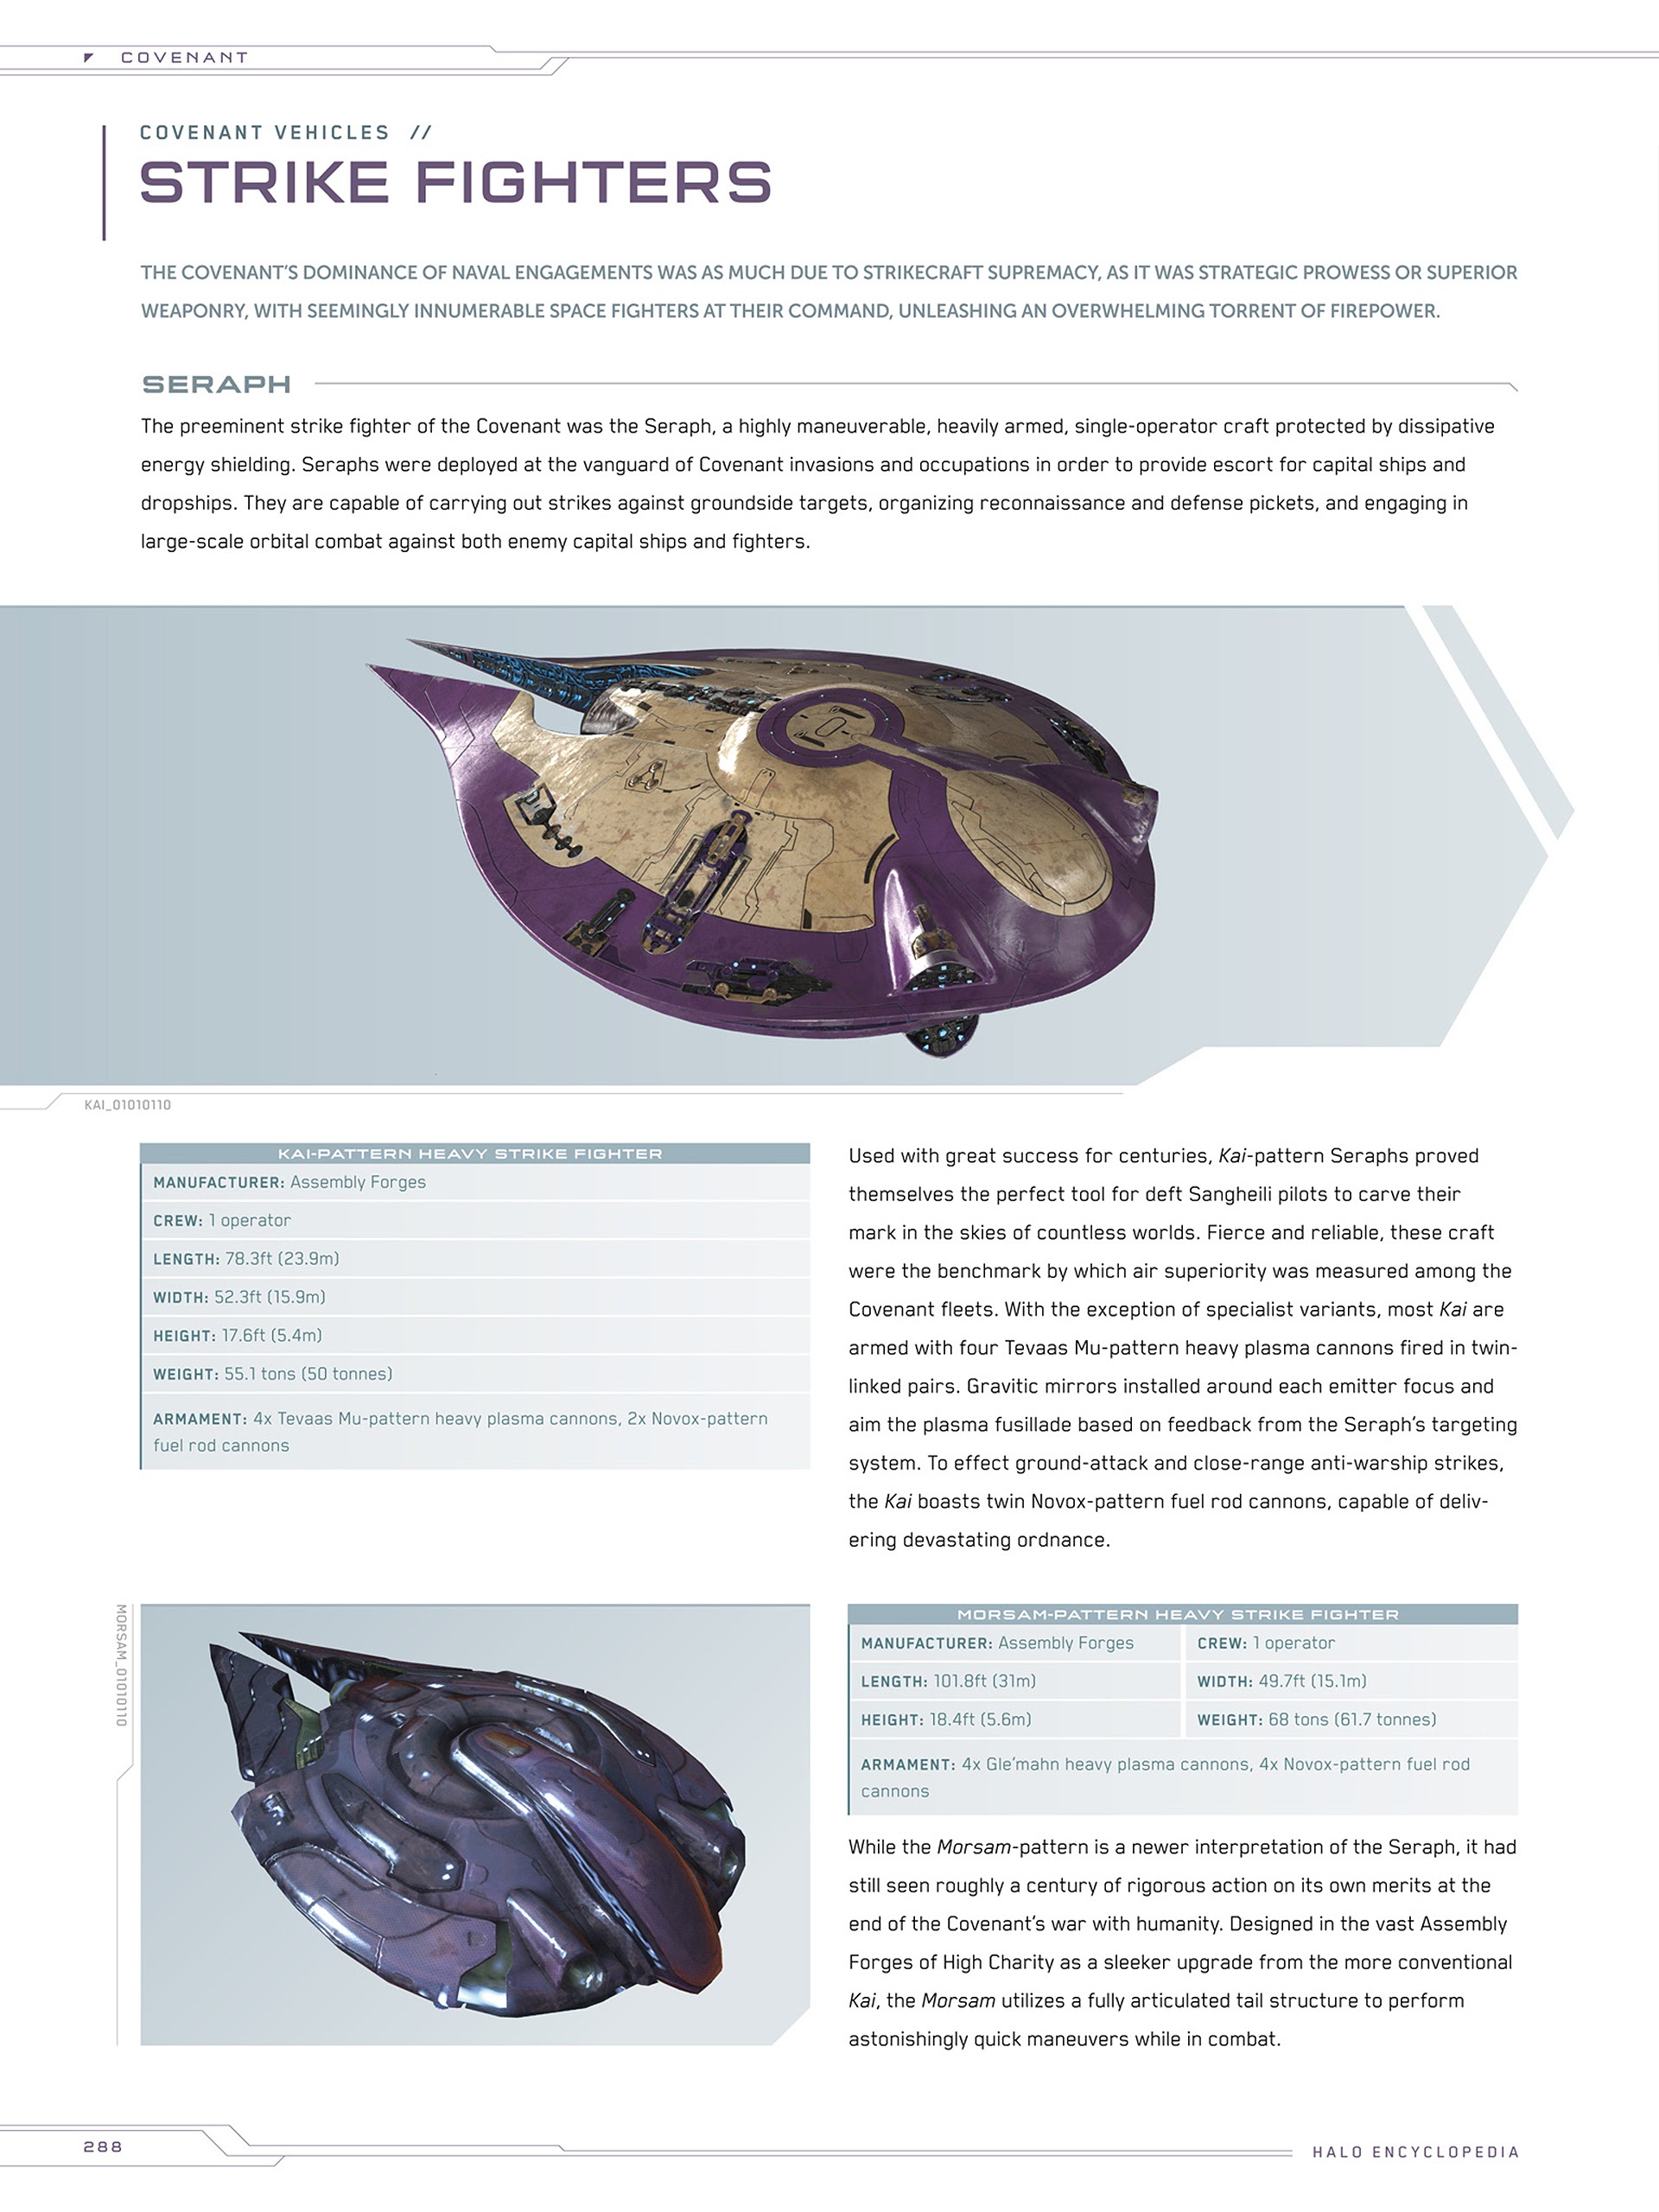 Read online Halo Encyclopedia comic -  Issue # TPB (Part 3) - 84